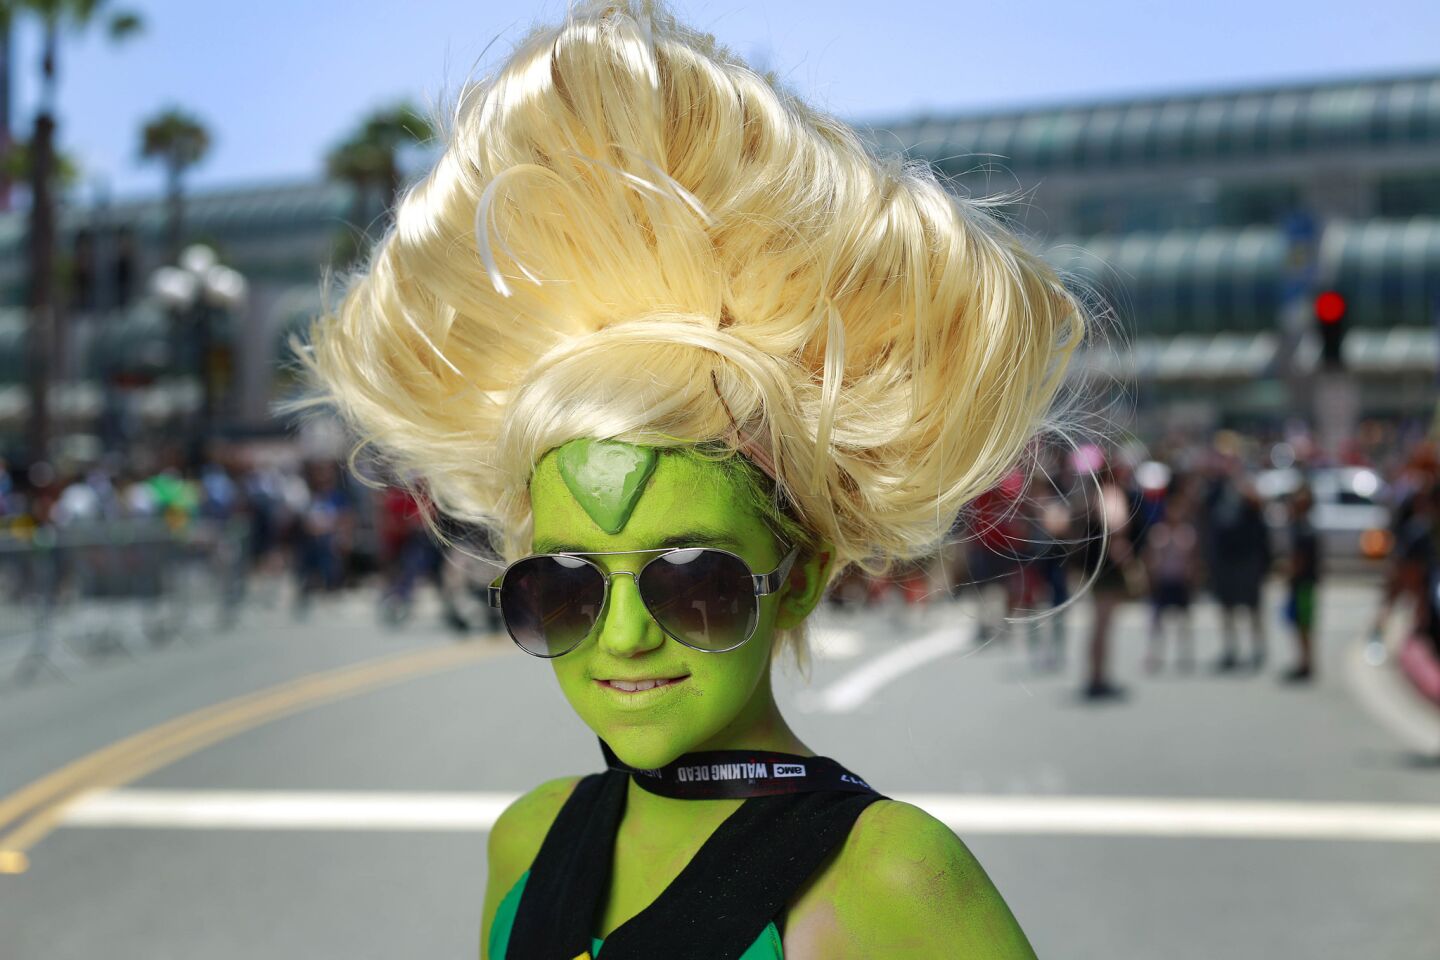 Sabrina Welke of Simi Valley dressed as Peridot at Comic-Con in San Diego on July 20, 2017. (Photo by K.C. Alfred/The San Diego Union-Tribune)